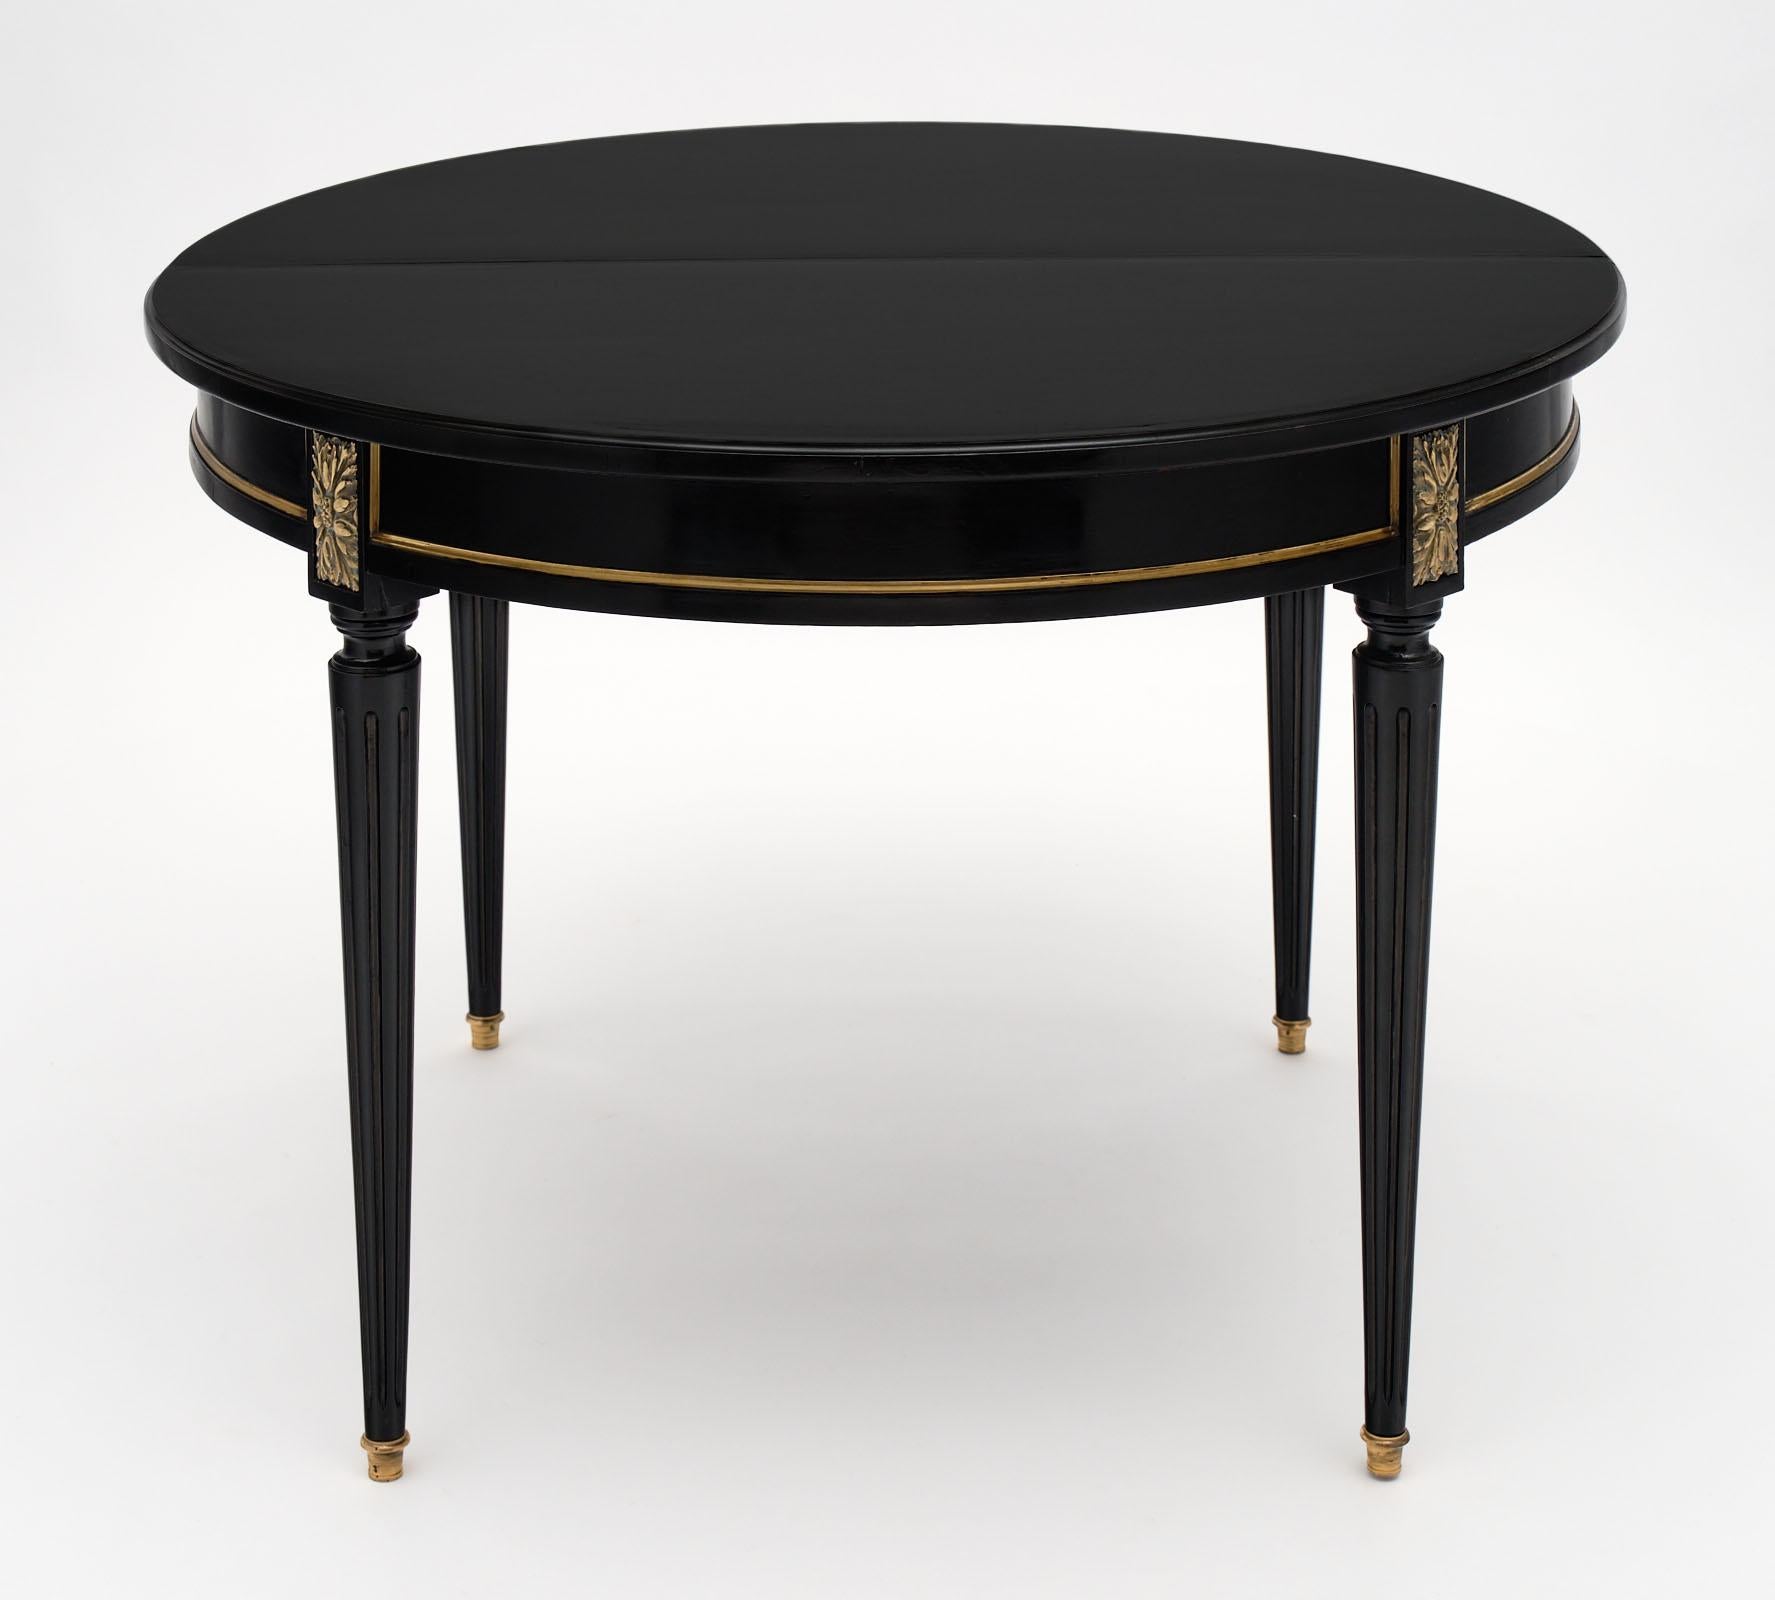 Round Louis XVI style antique dining table made of mahogany that has been ebonized and finished with a French polish. There is gilt brass trim and details throughout. We love the tapered legs with fluting and the bronze feet. The table opens up and